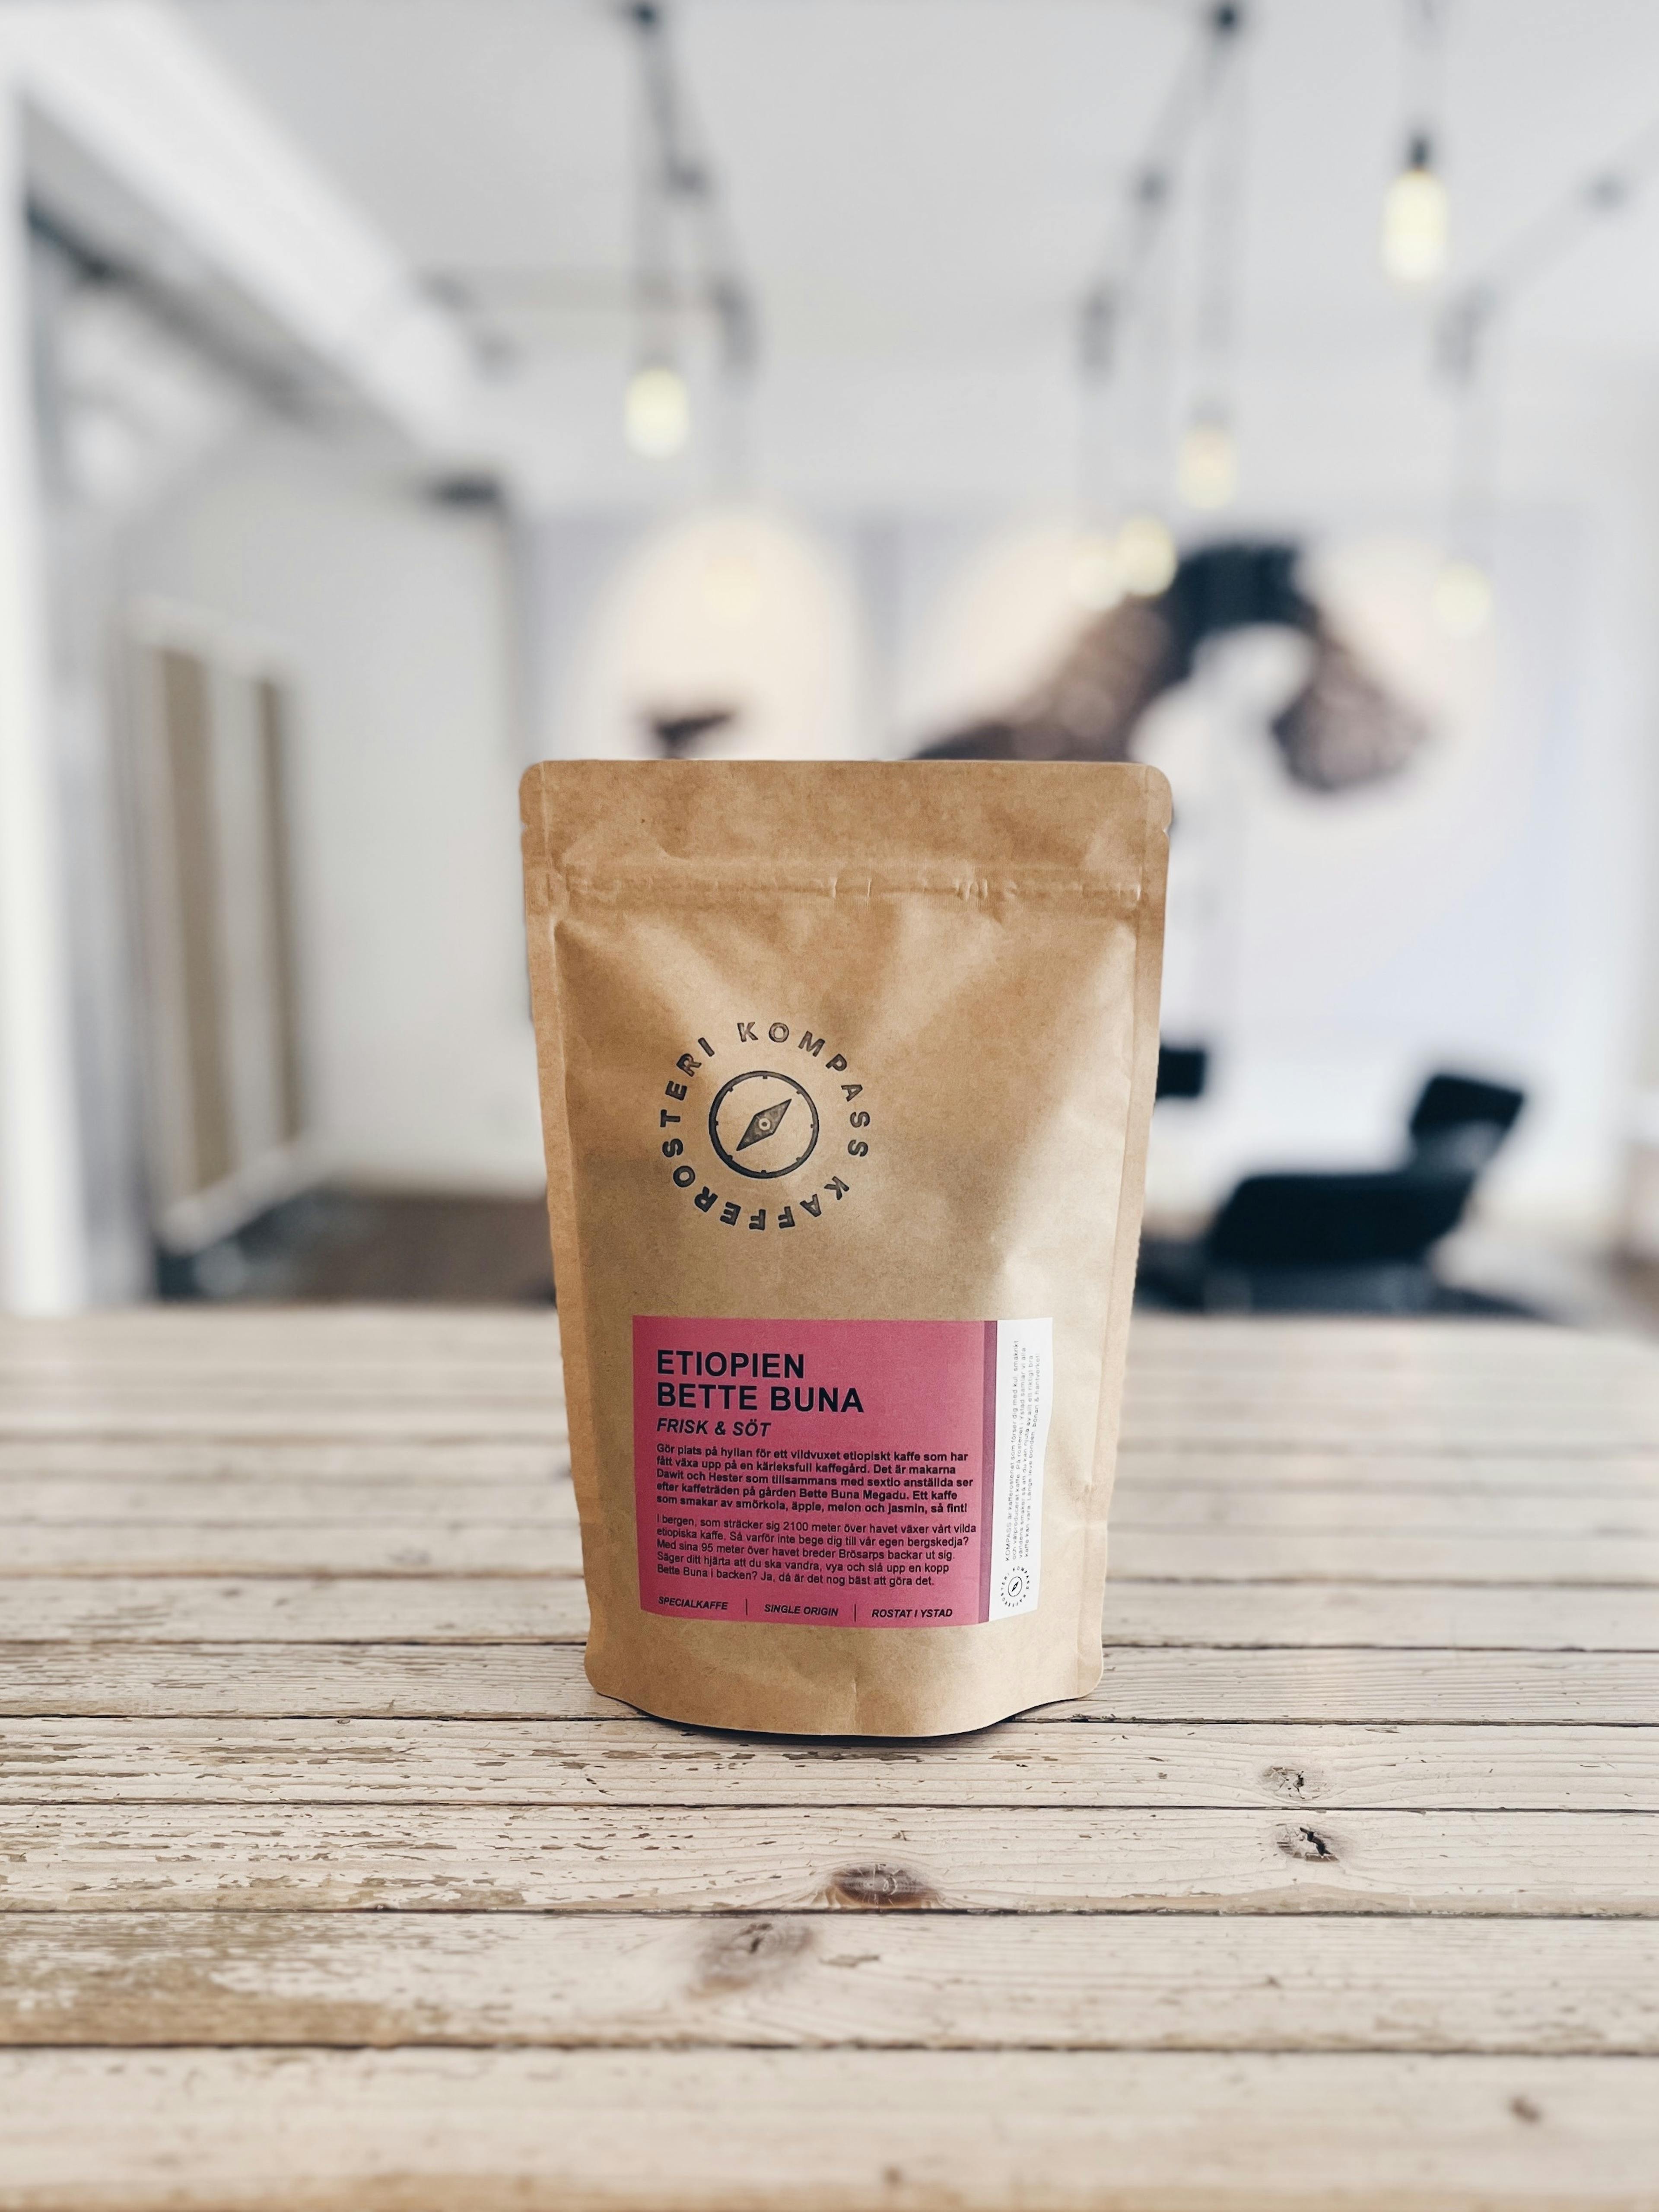 Bag of speciality coffee from Kompass kafferosteri on a counter